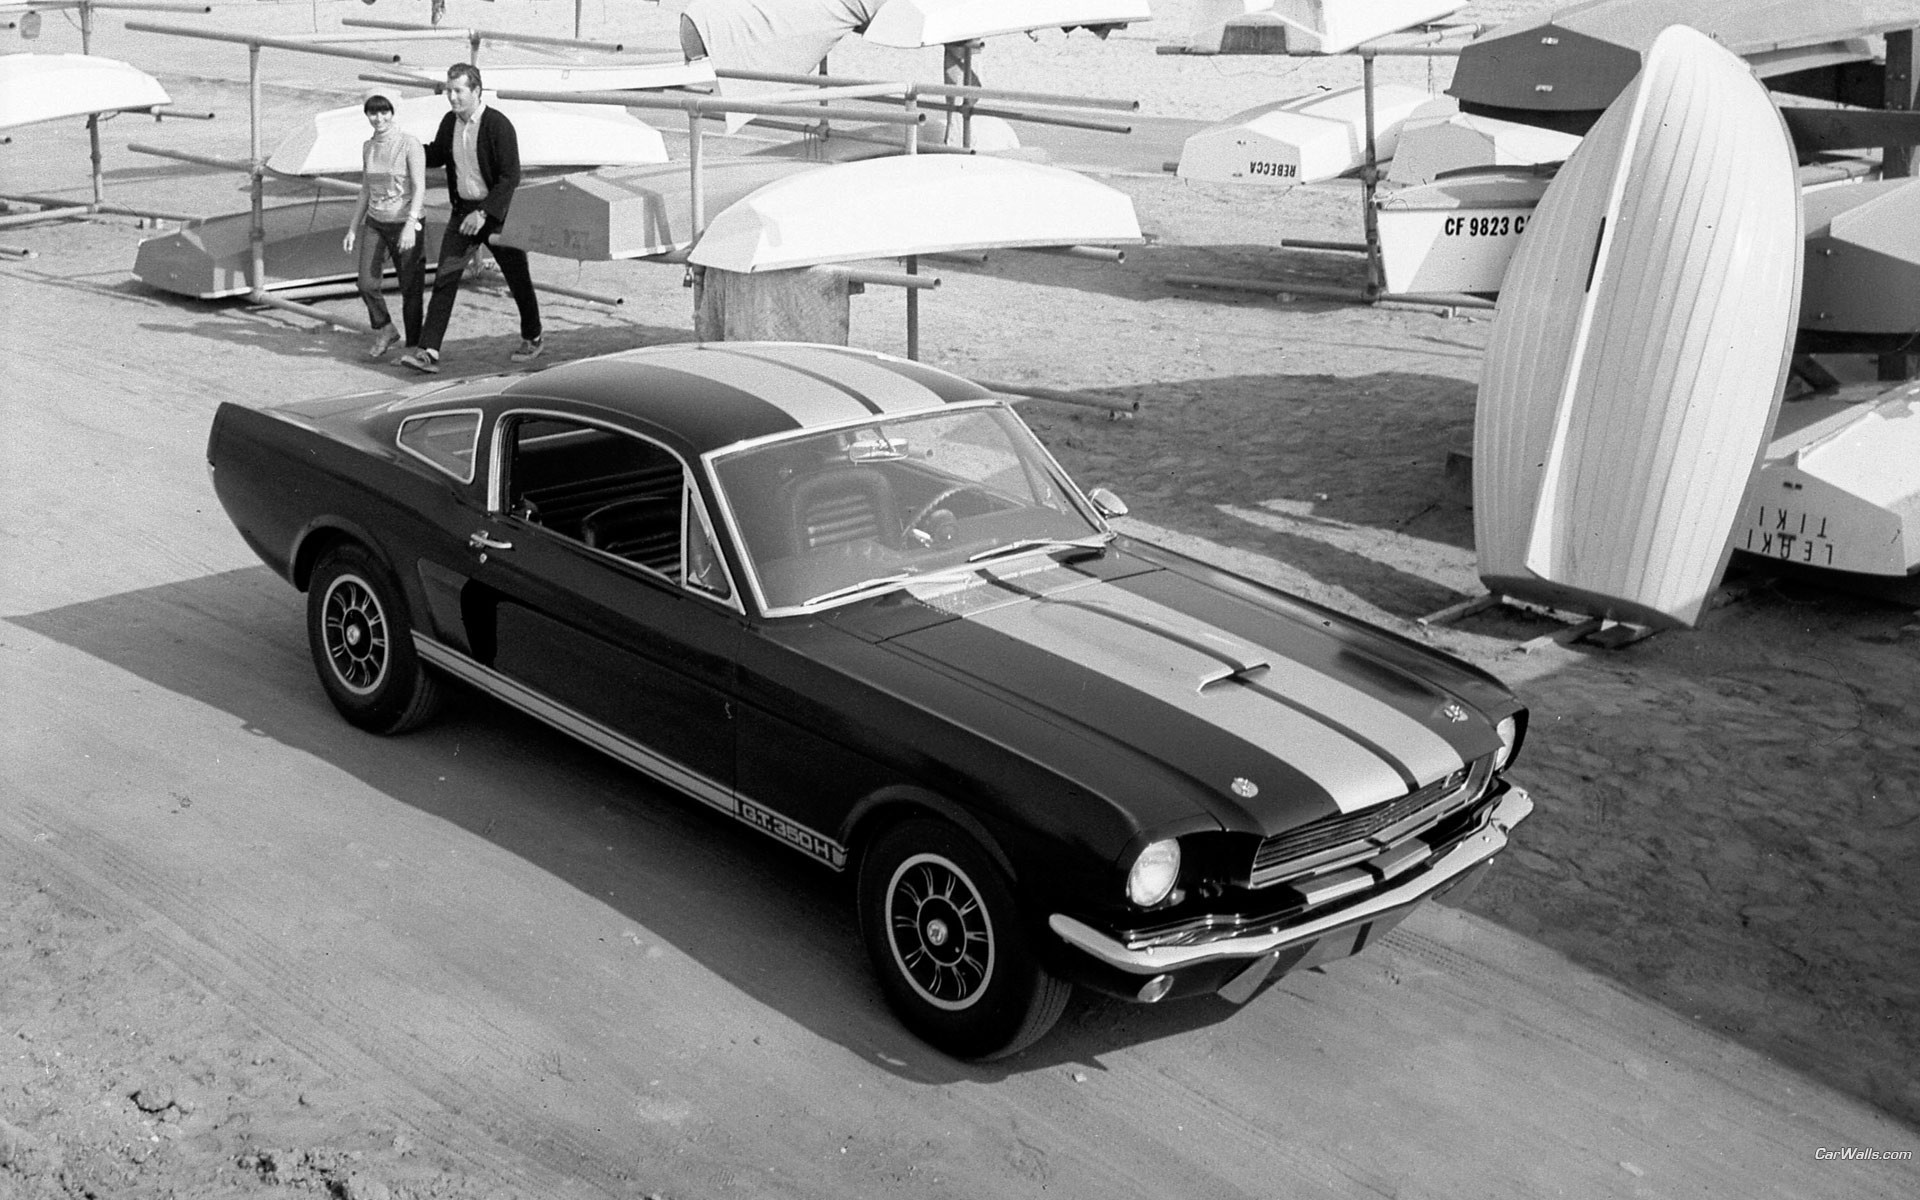 General 1920x1200 car monochrome vehicle Ford Ford Mustang Shelby Ford Mustang racing stripes American cars